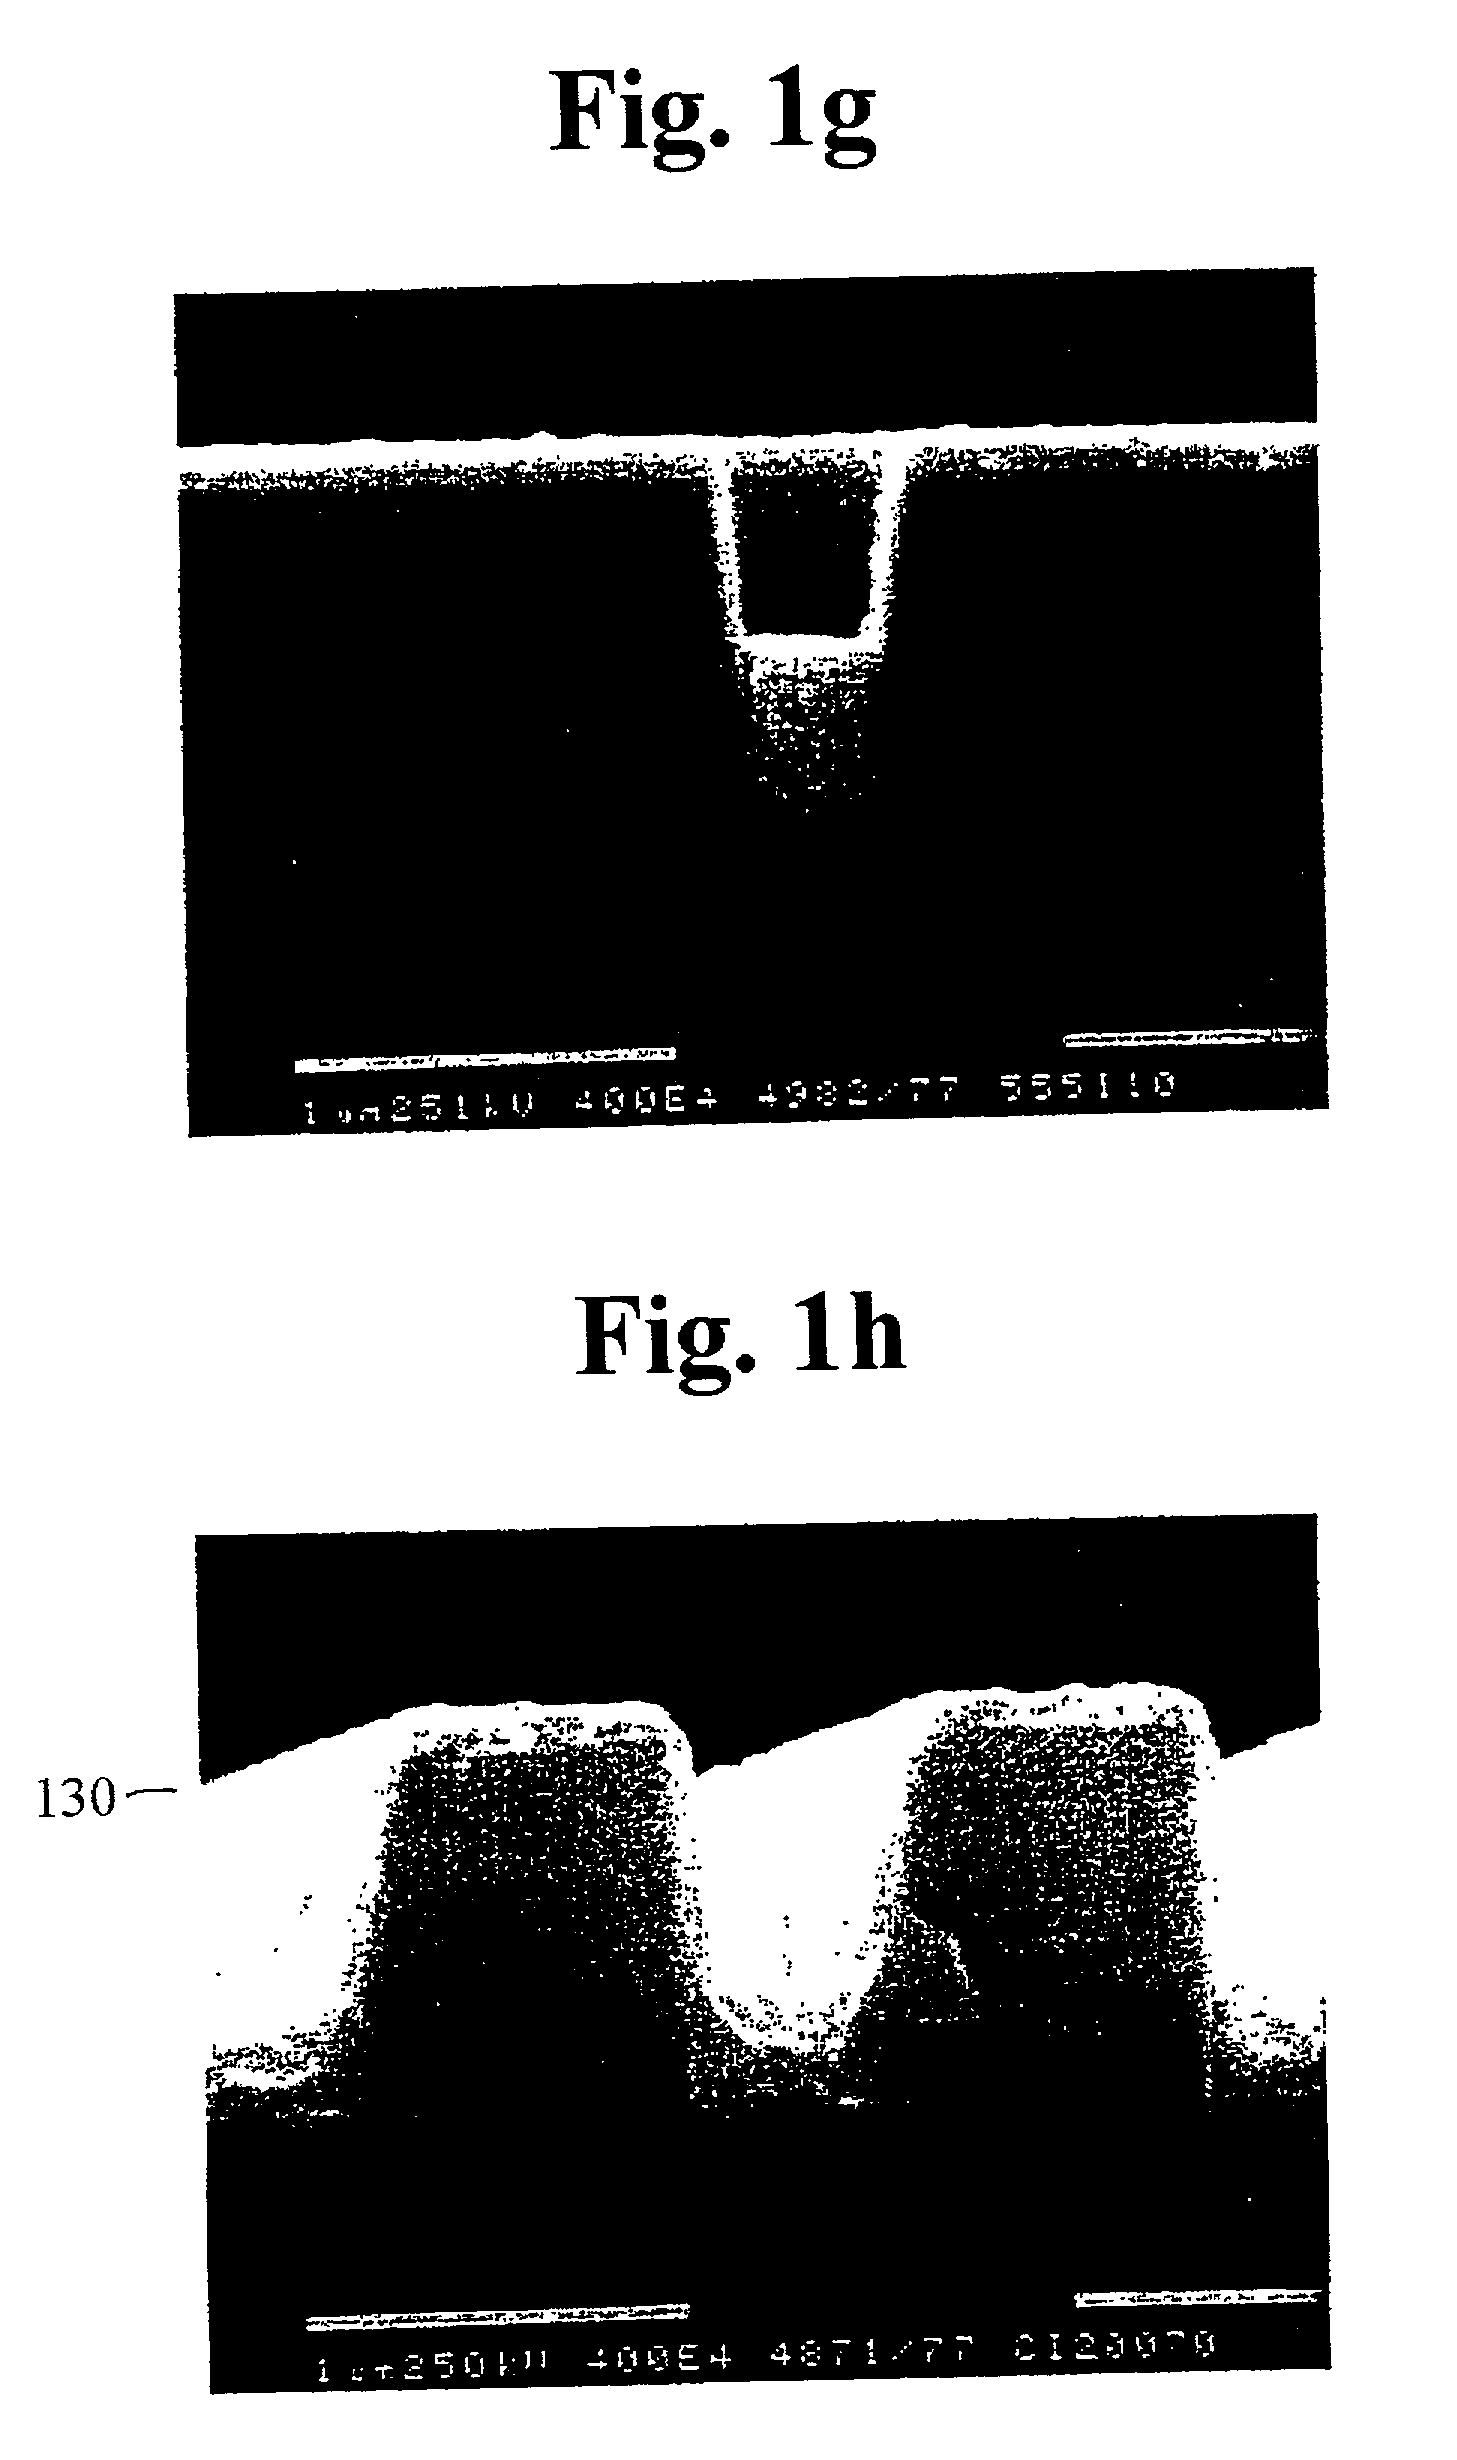 Method of forming copper interconnections and thin films using chemical vapor deposition with catalyst